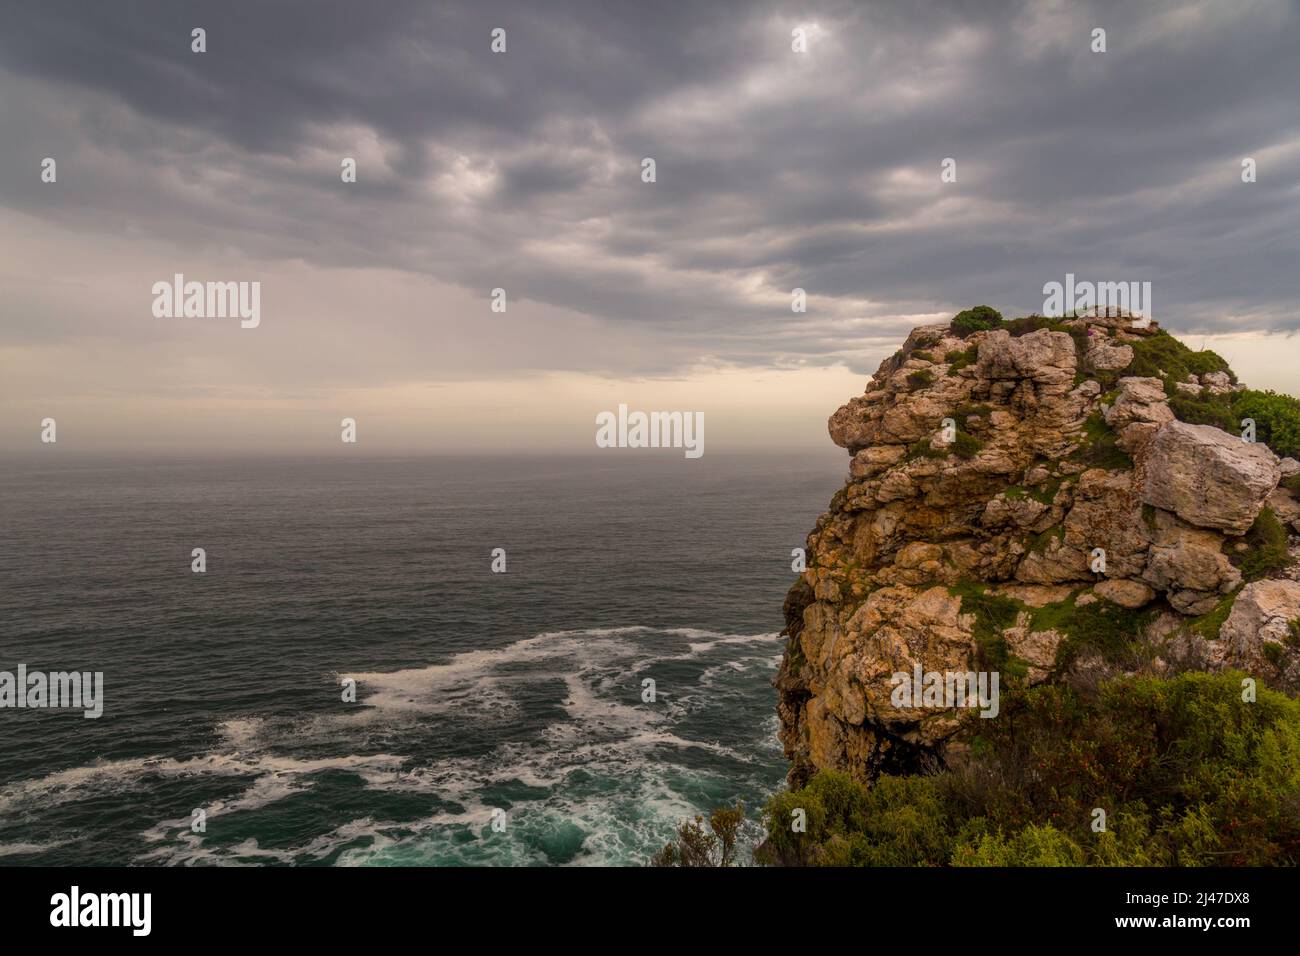 A rocky outcrop overlooking the ocean on The Otter Trail in the Western Cape of South Africa. Stock Photo